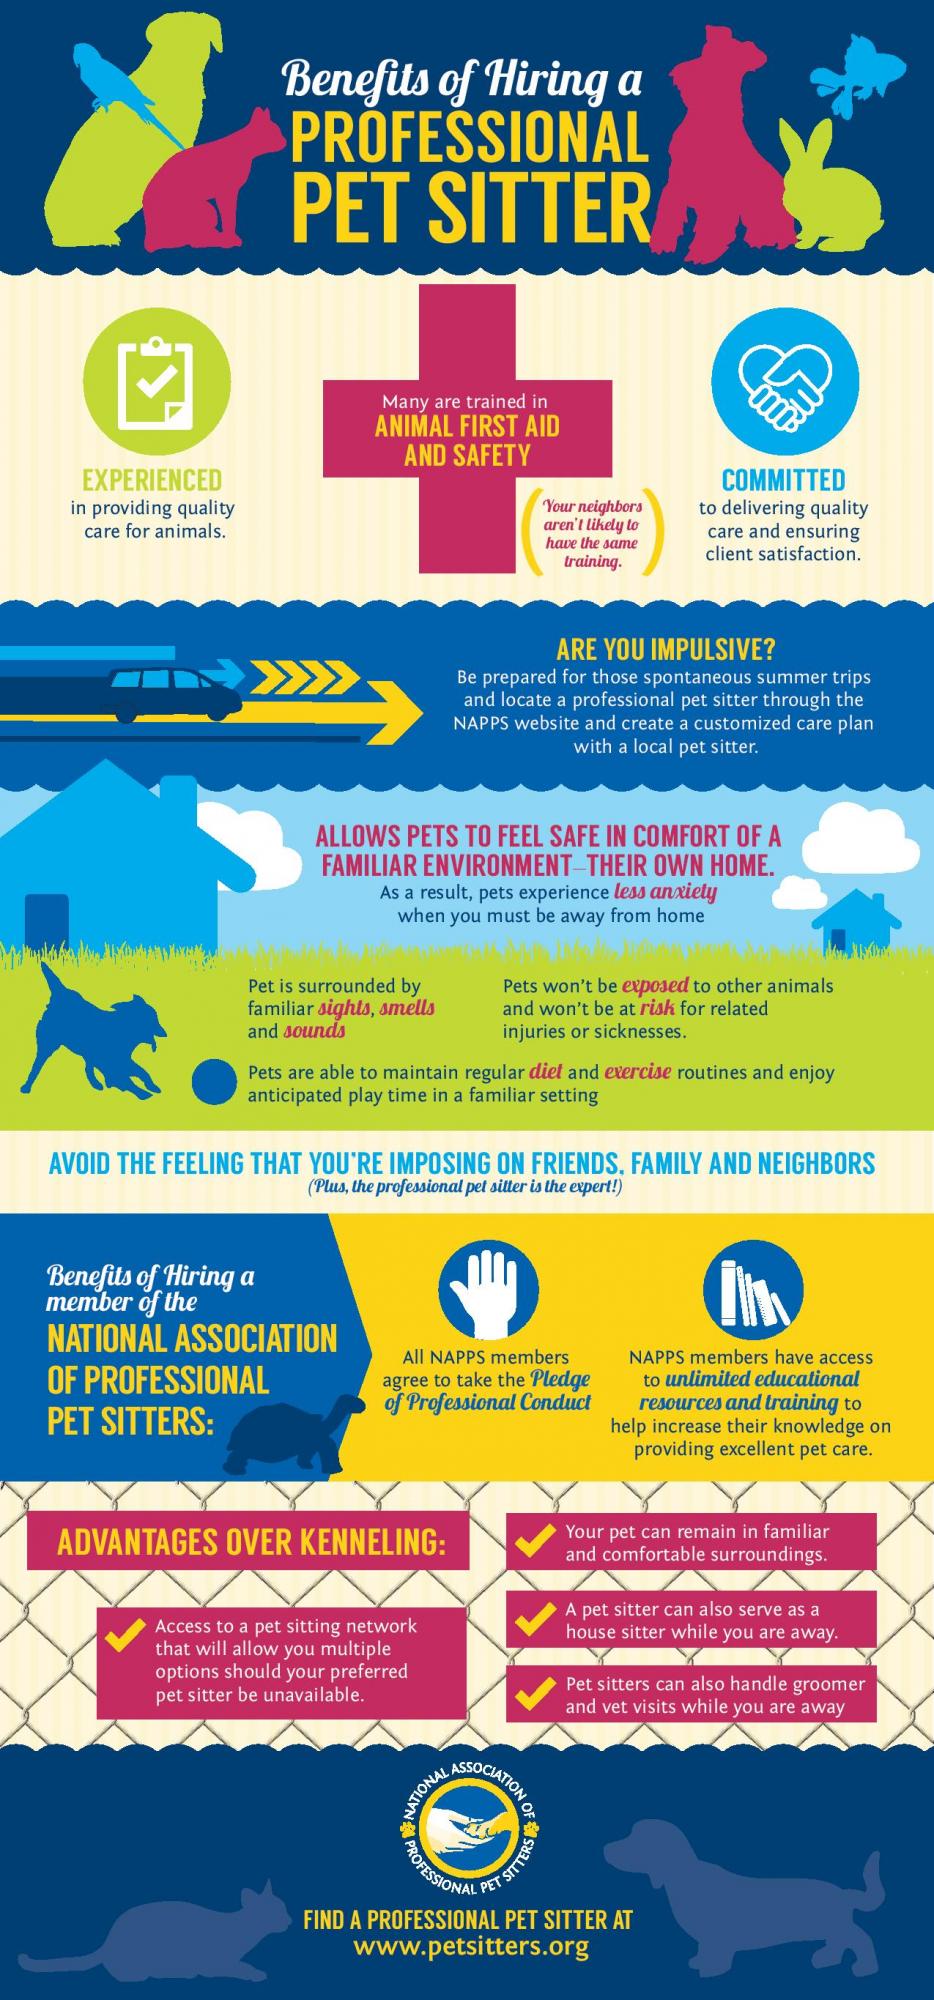 Benefits of Hiring a Professional Pet Sitter infographic